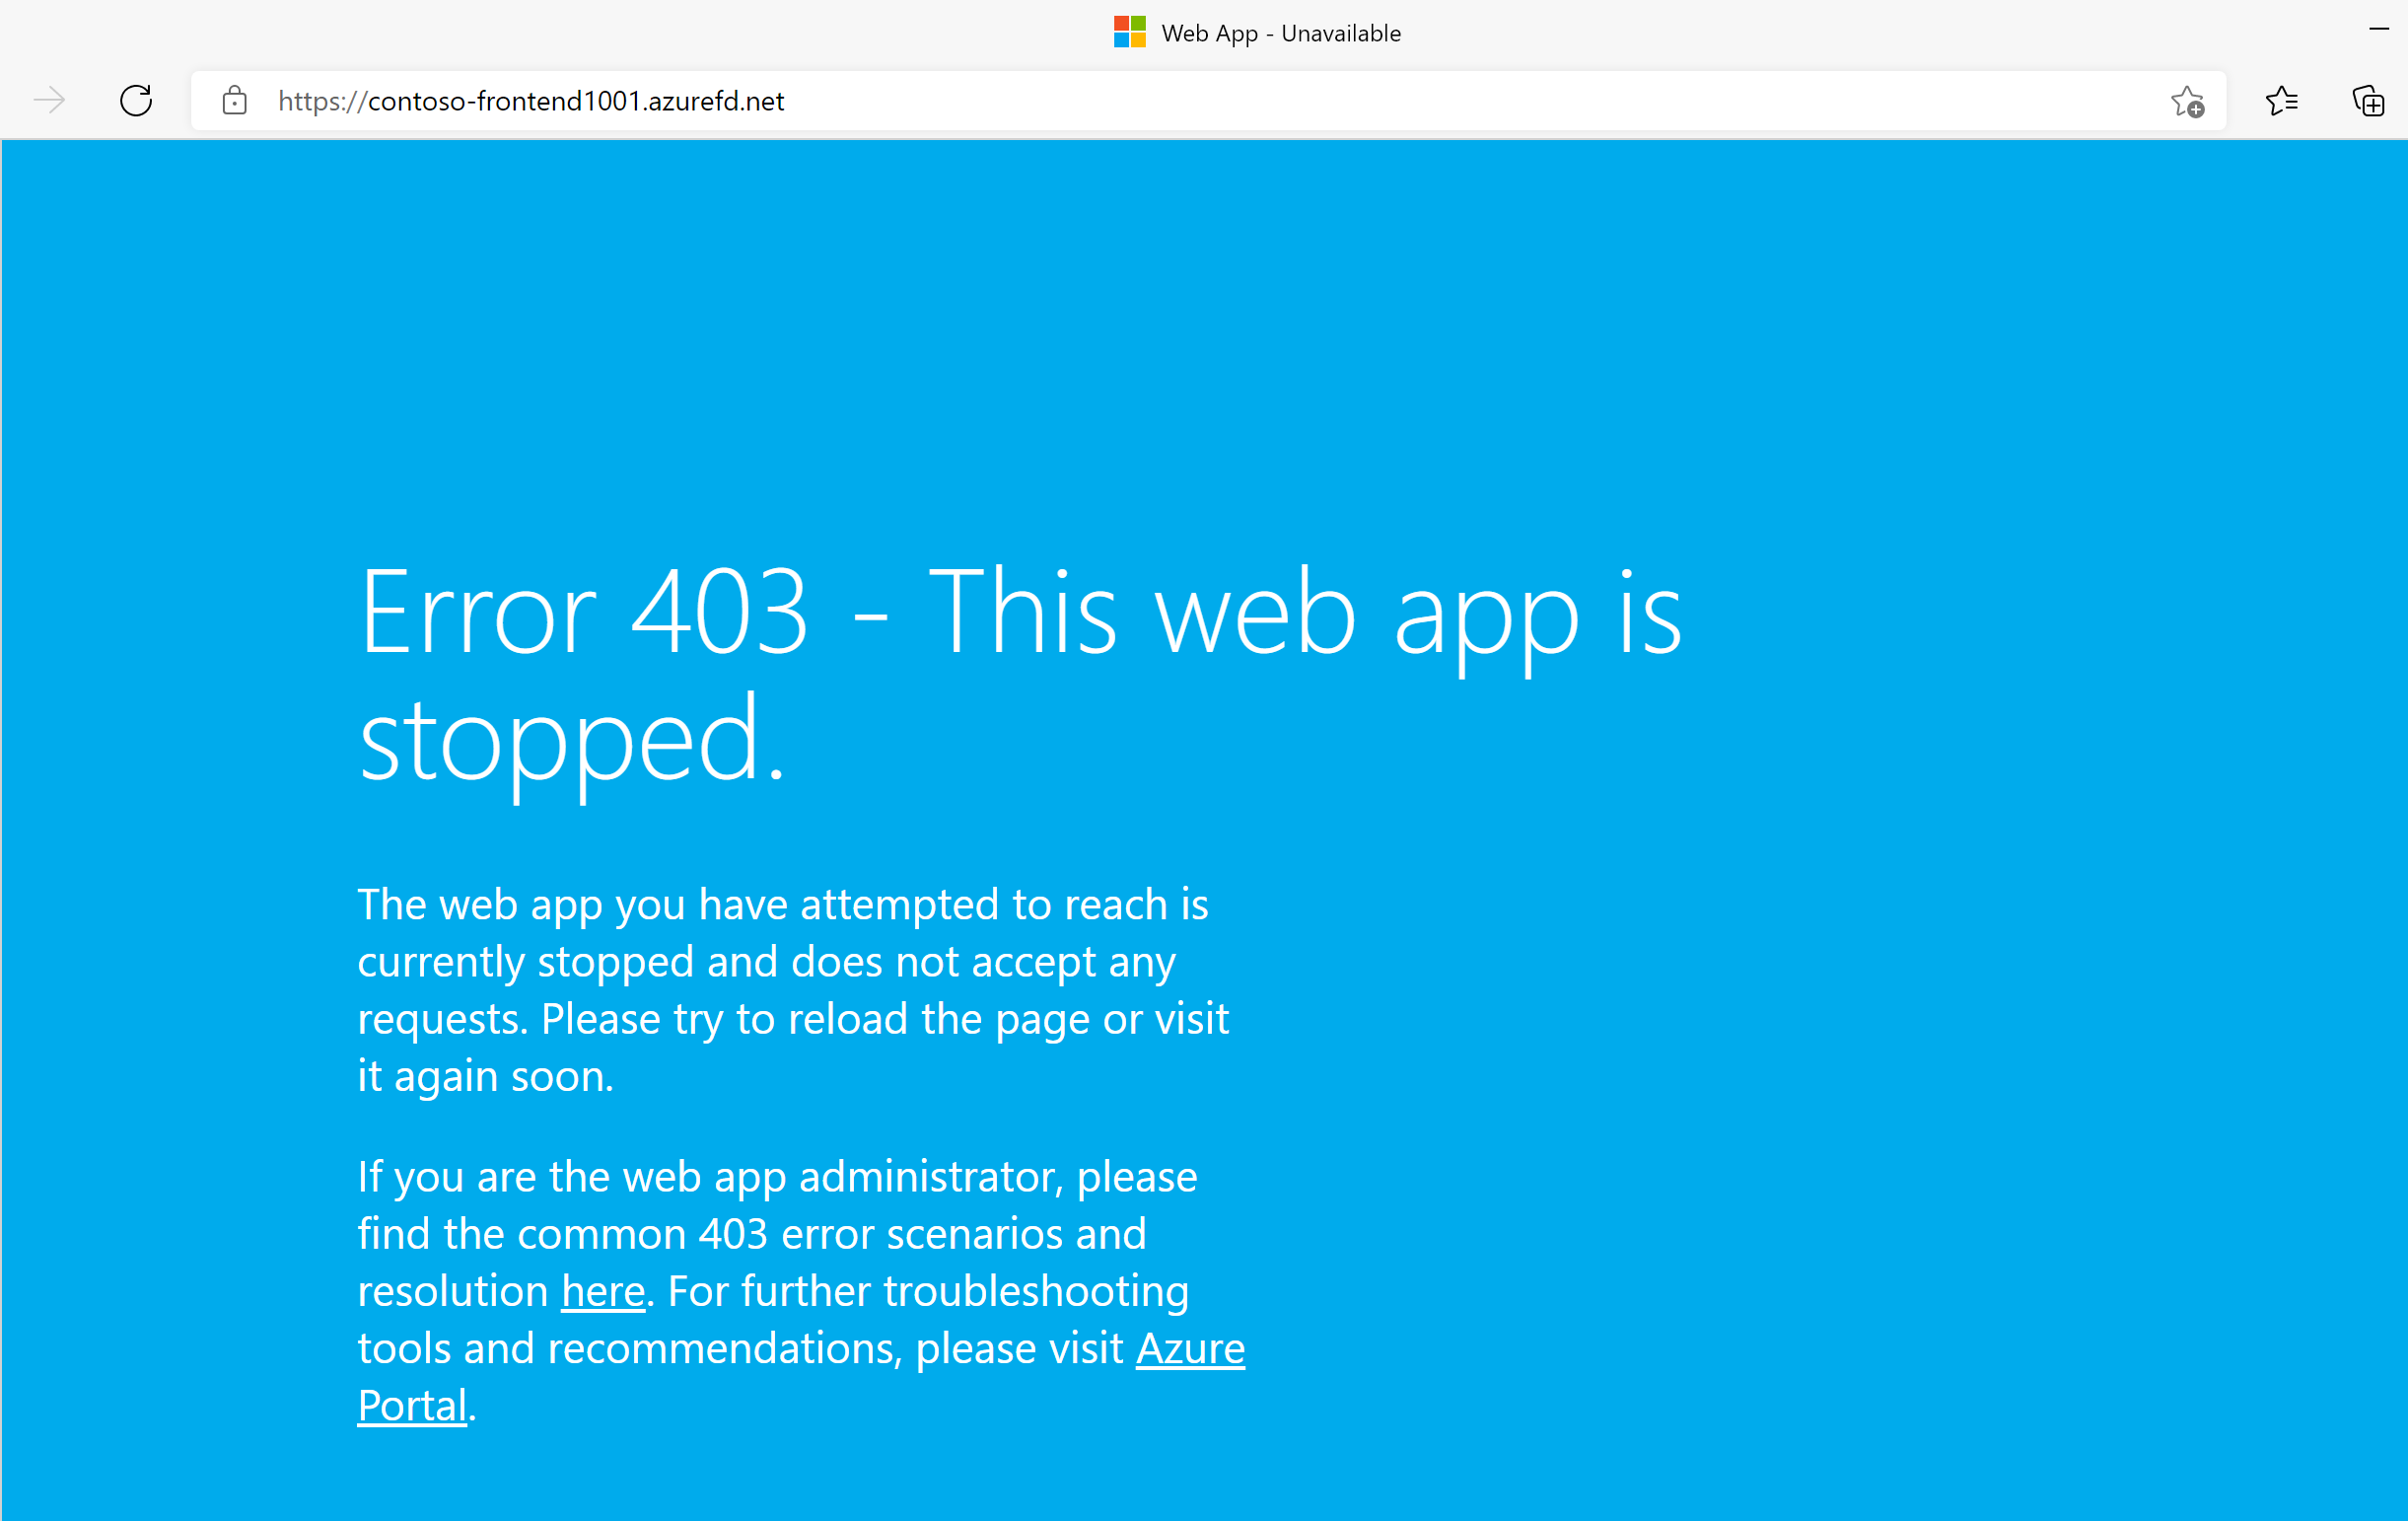 Browser showing App Service error page